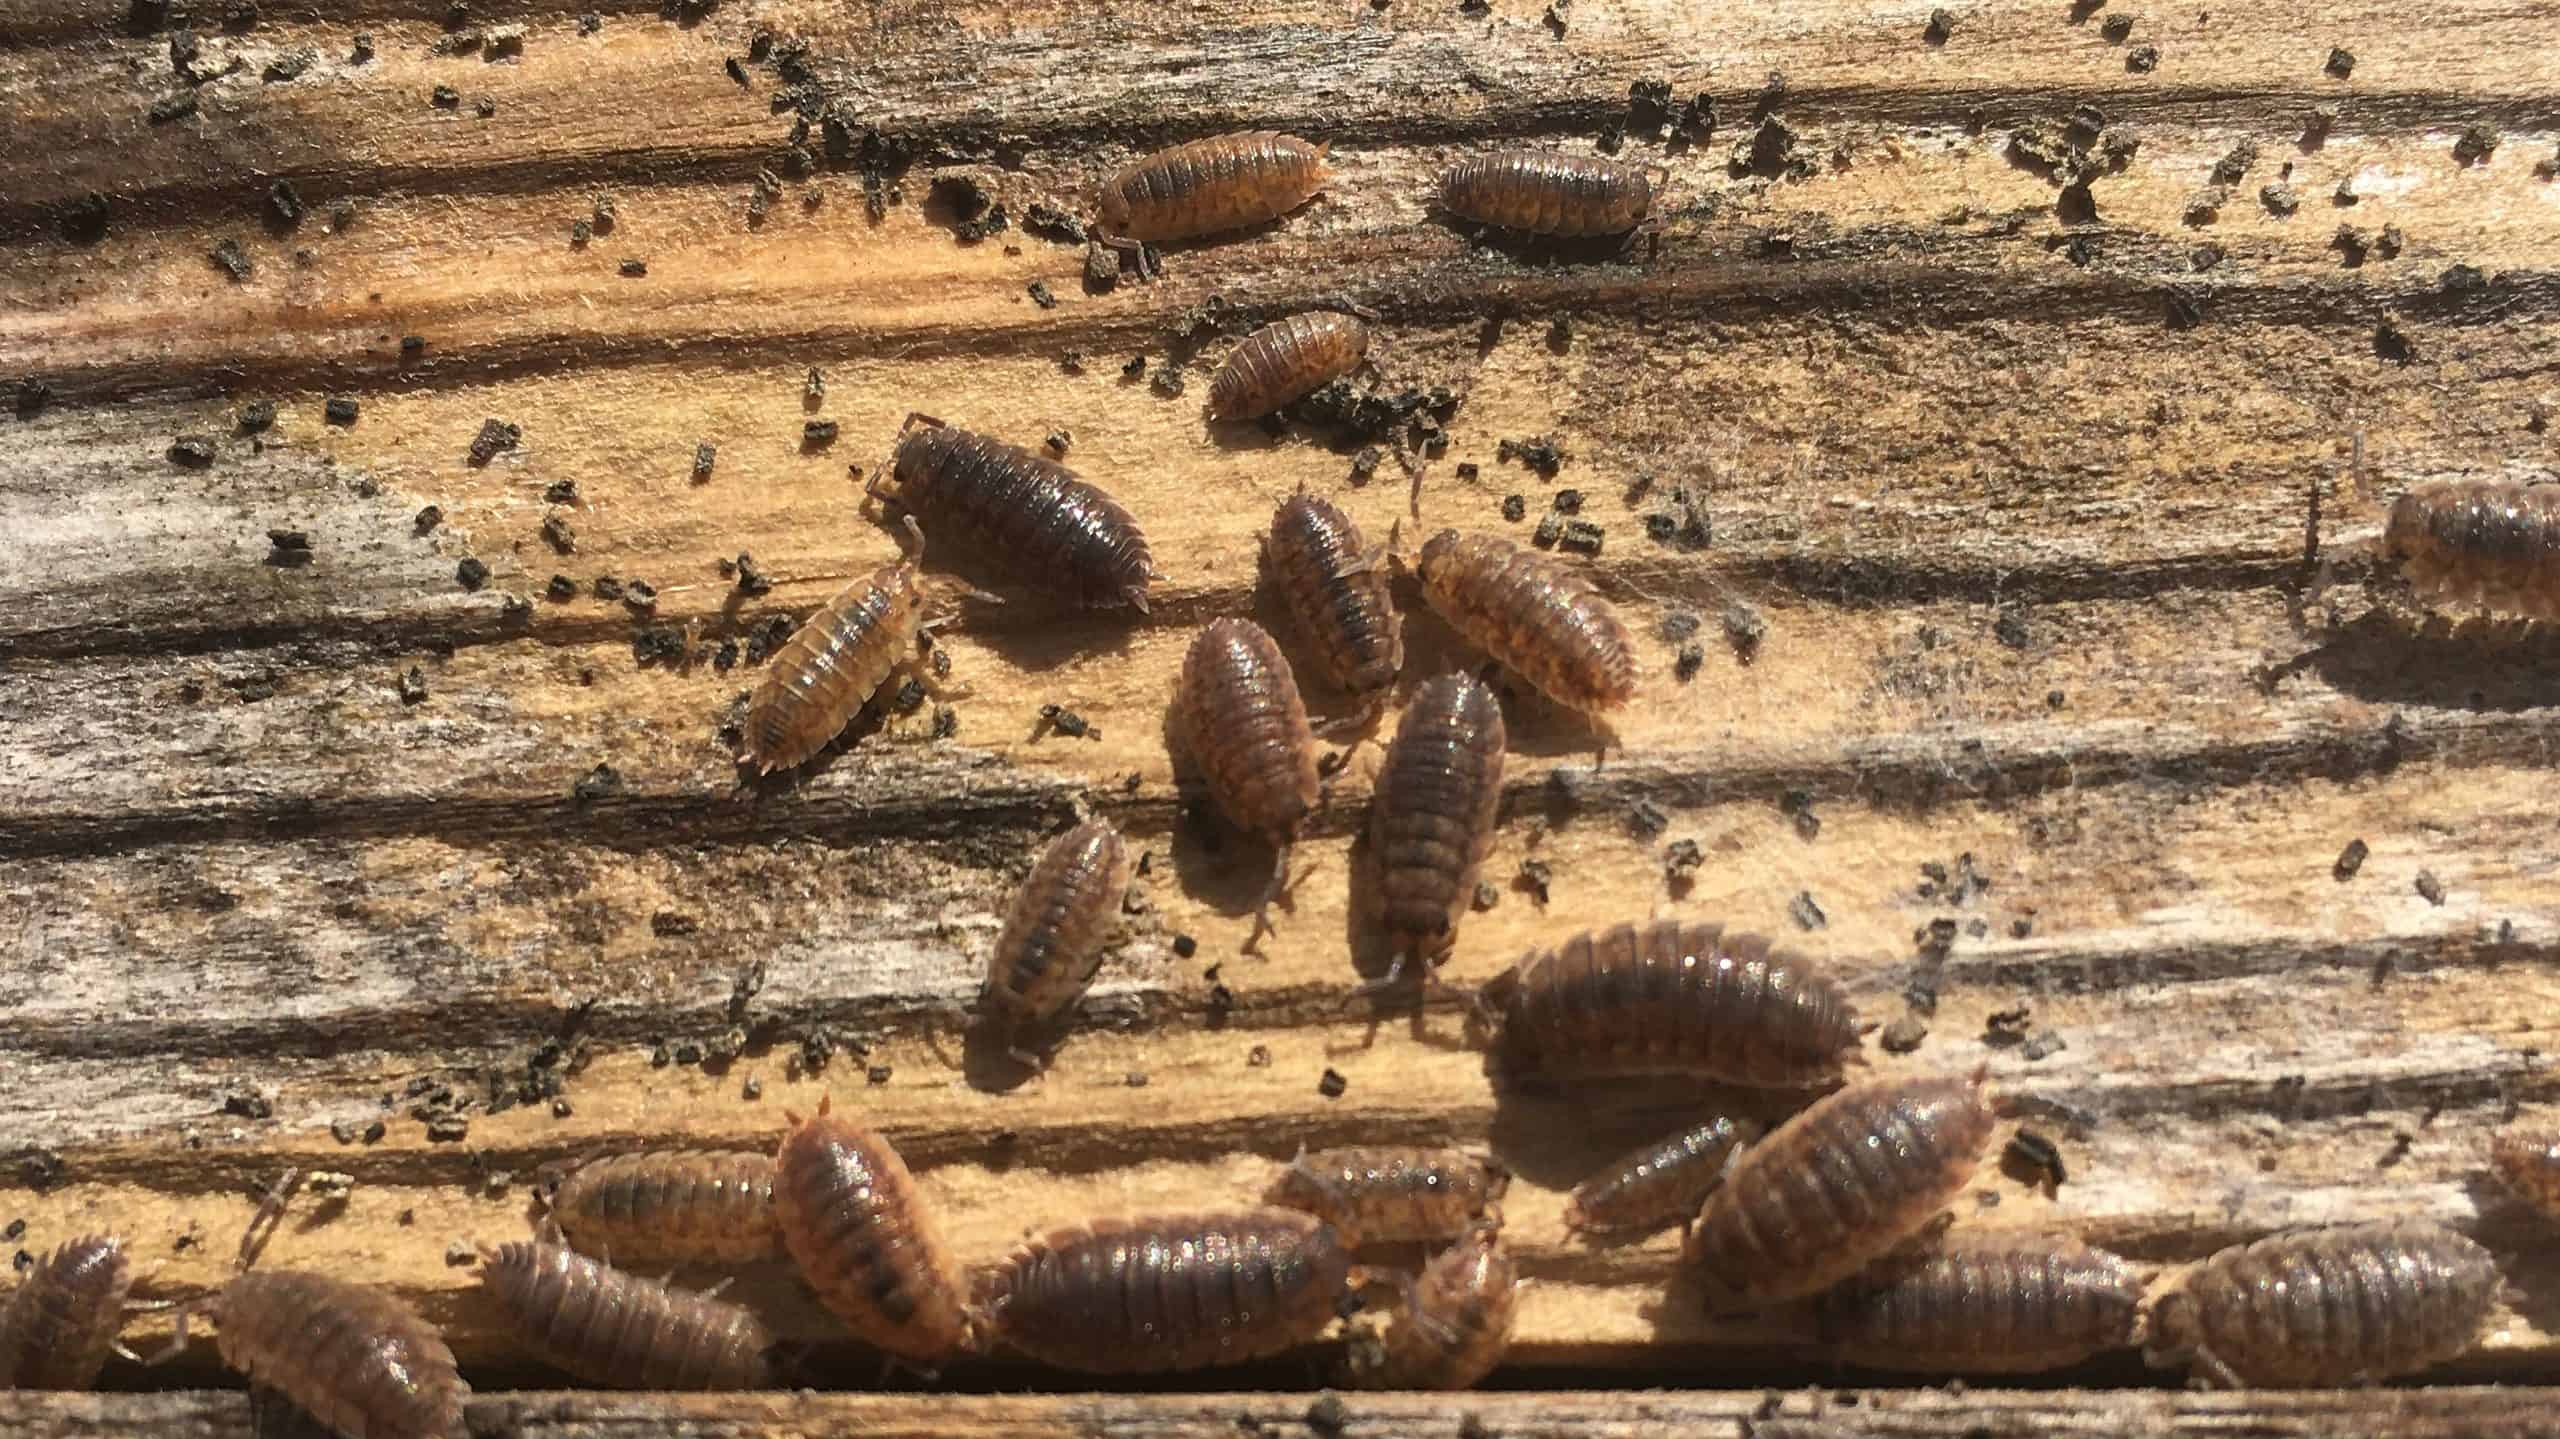 Adult and baby woodlice wood louse scattering after being disturbed pill bug sow bug walking along a grainy textured plank of wood